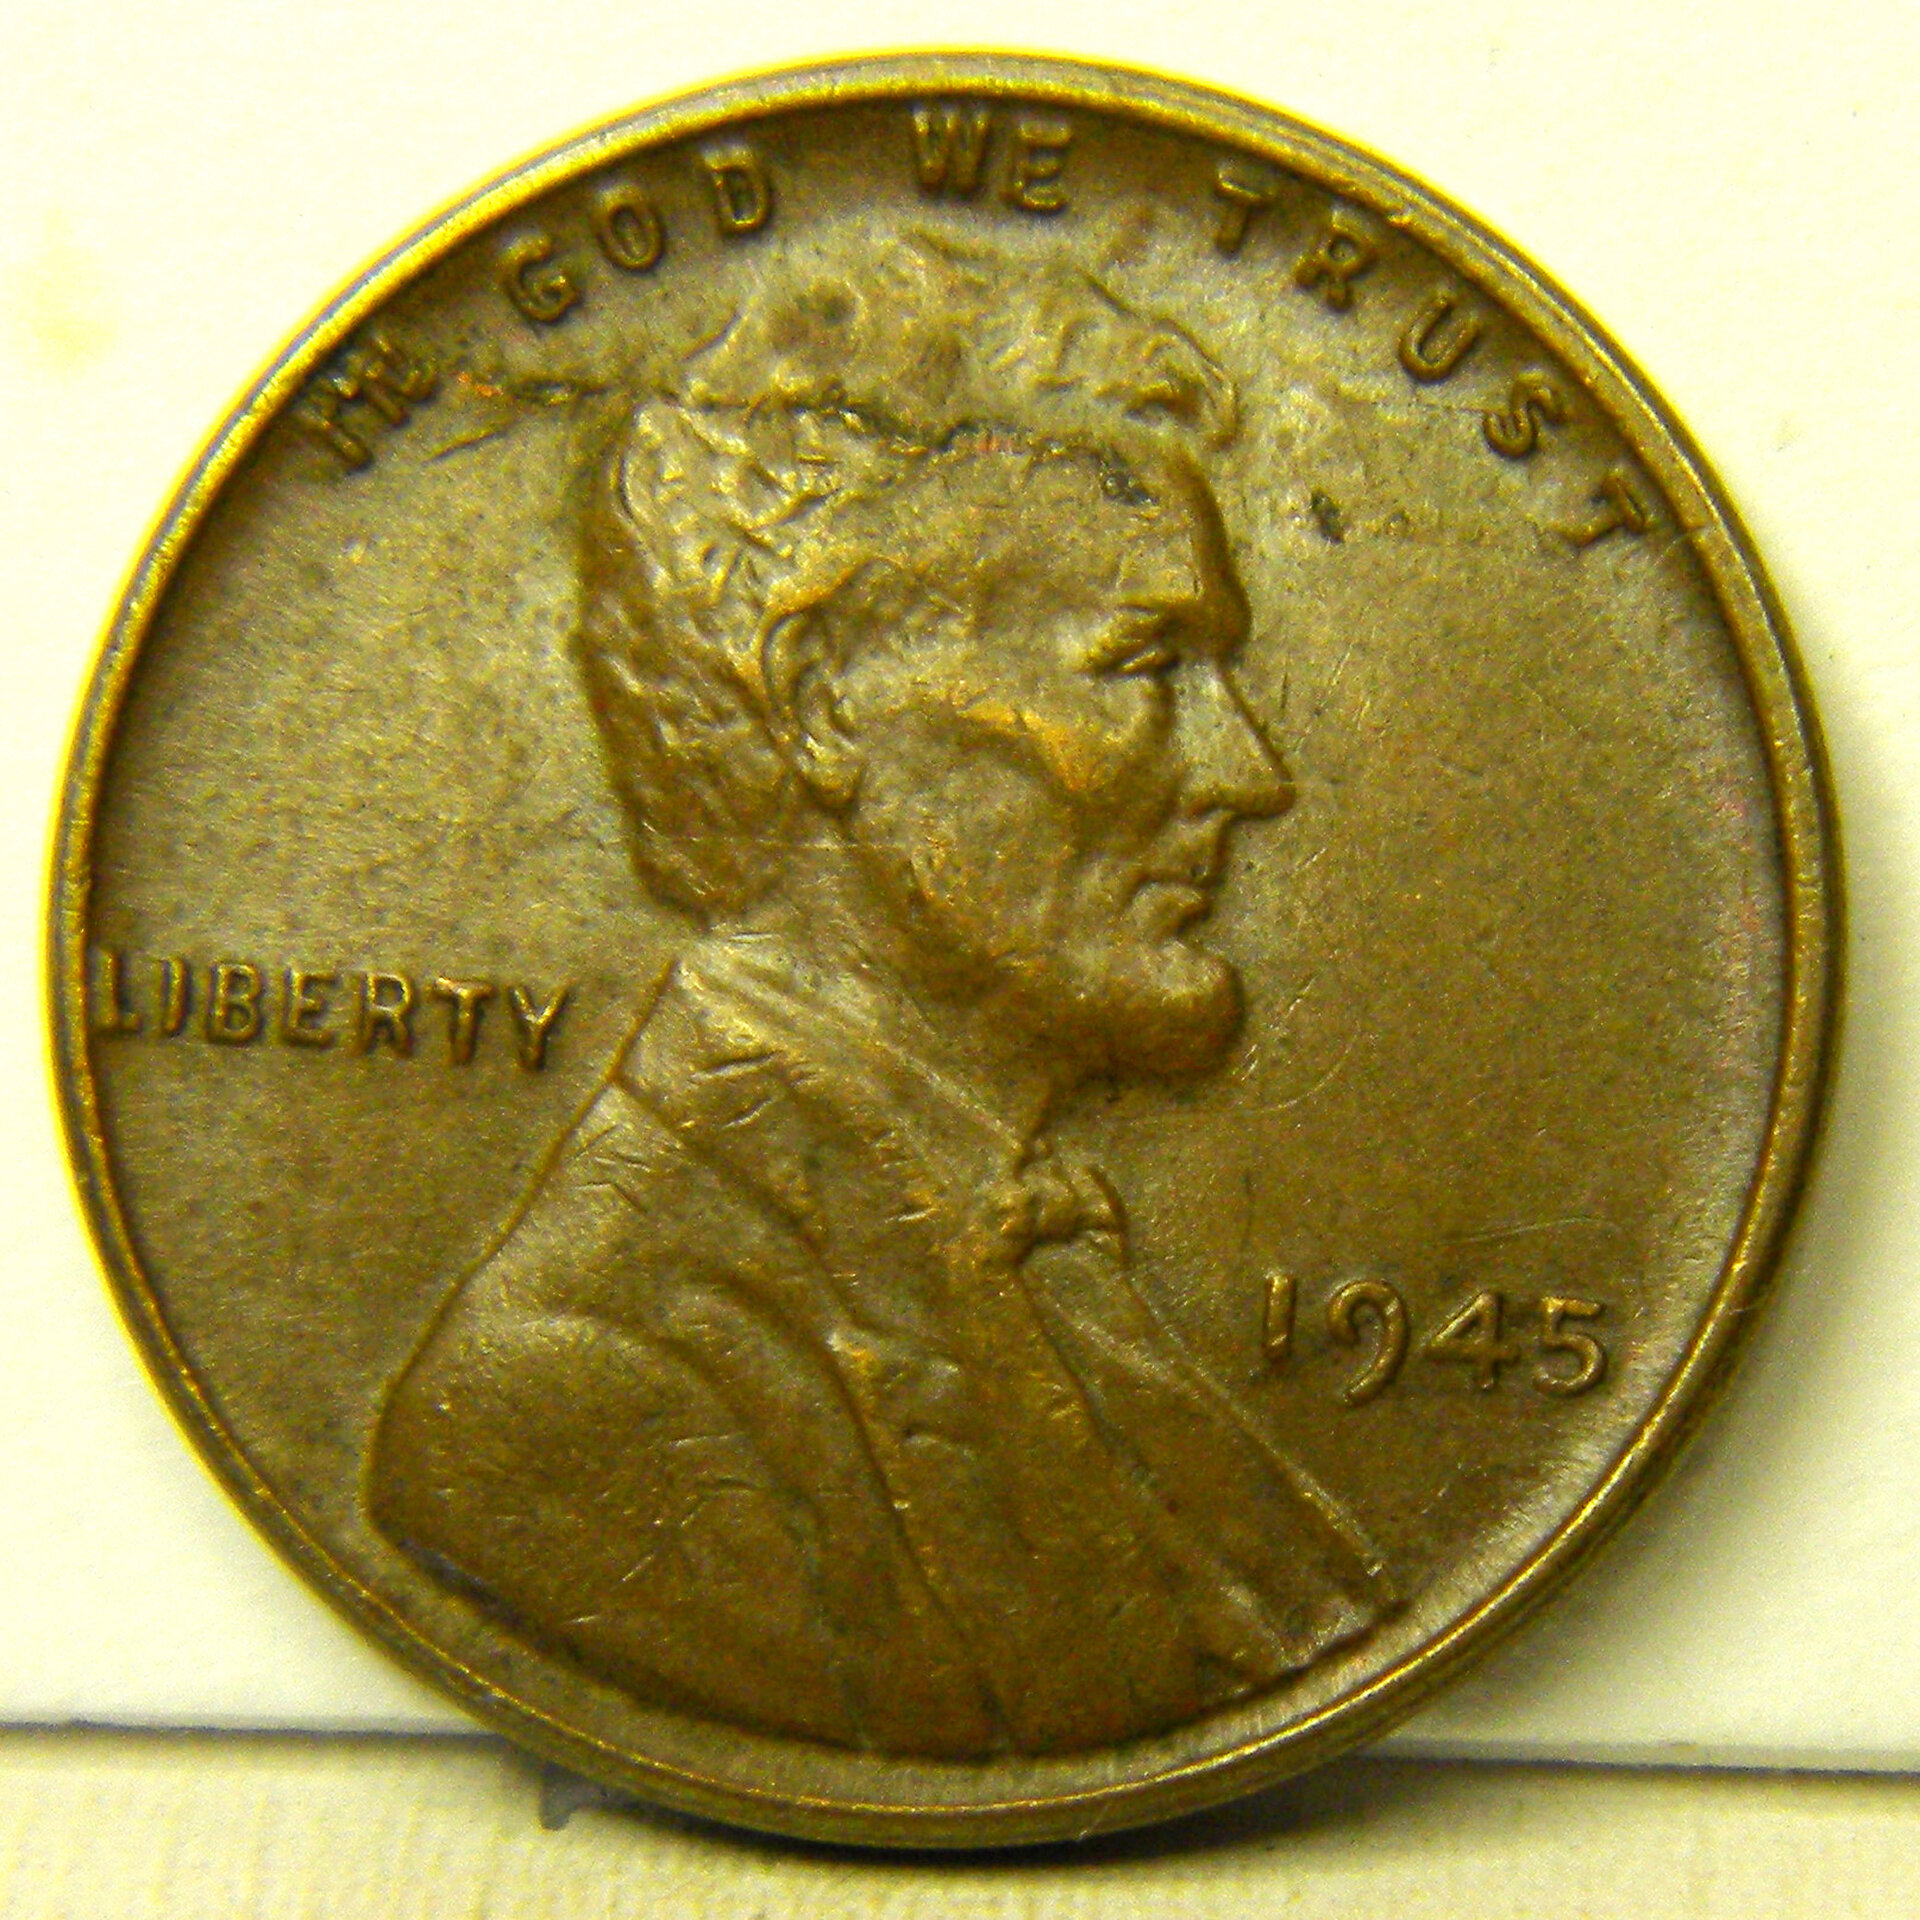 1945 Lincoln Wheat Penny (Obverse).jpg